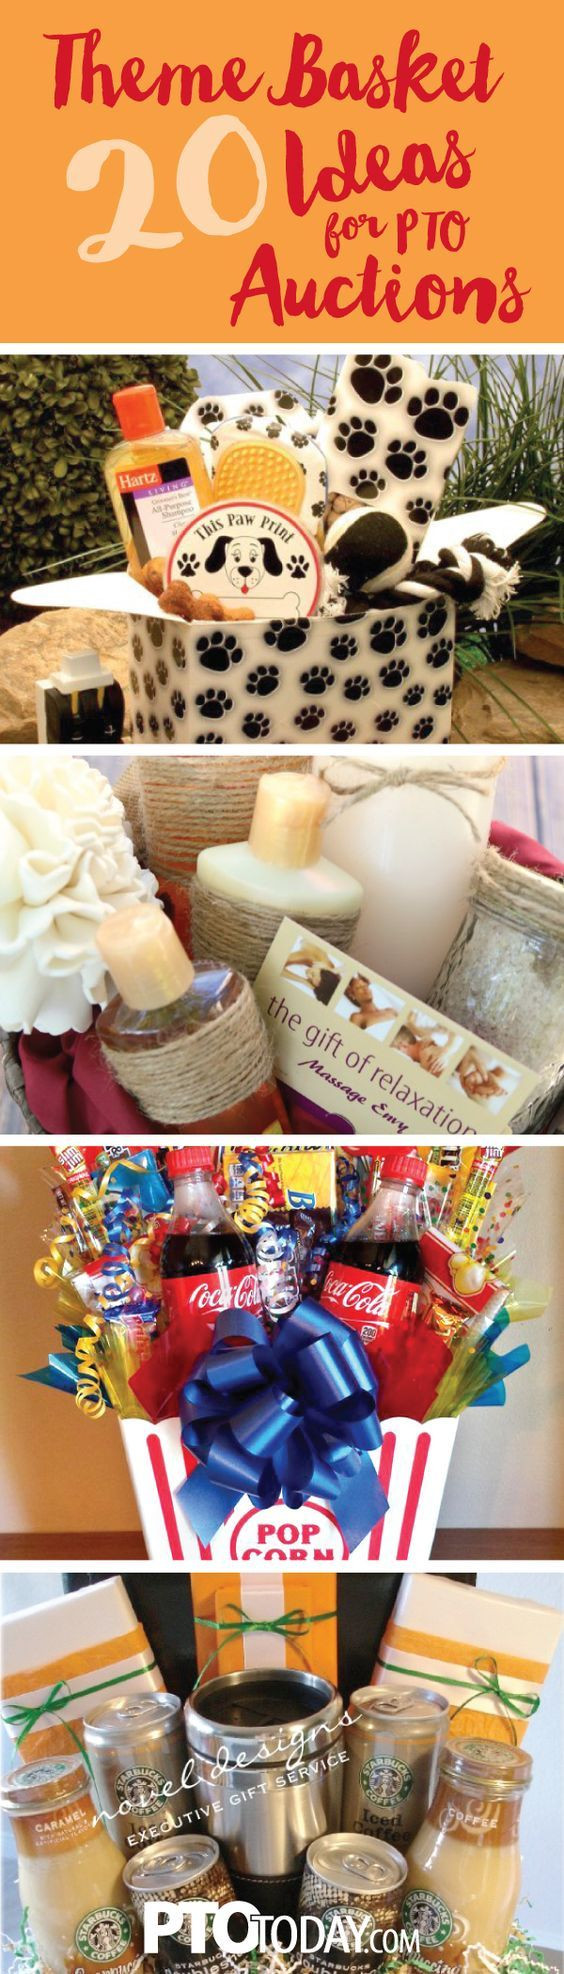 Themed Gift Basket Ideas
 20 Ideas for Theme Baskets for PTOs and PTAs